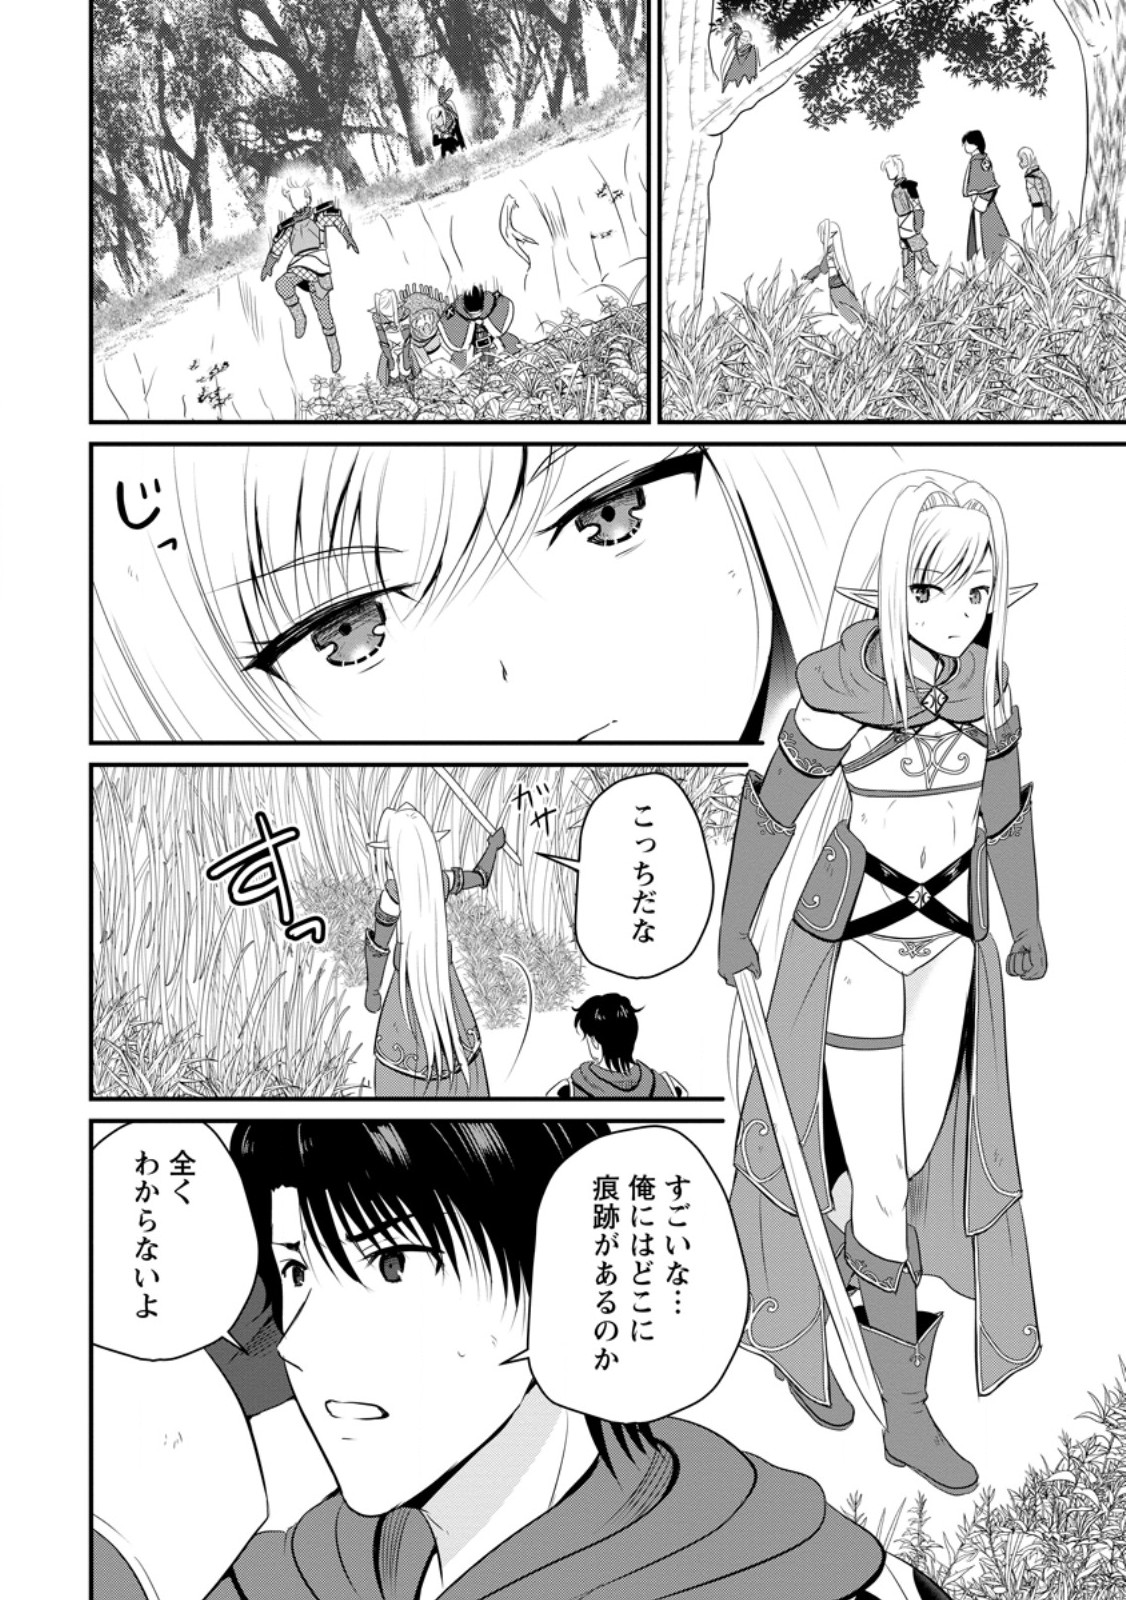 The Frontier Life of The Low-Class Ossan Healer And The Lovery Girl - Chapter 48.3 - Page 2